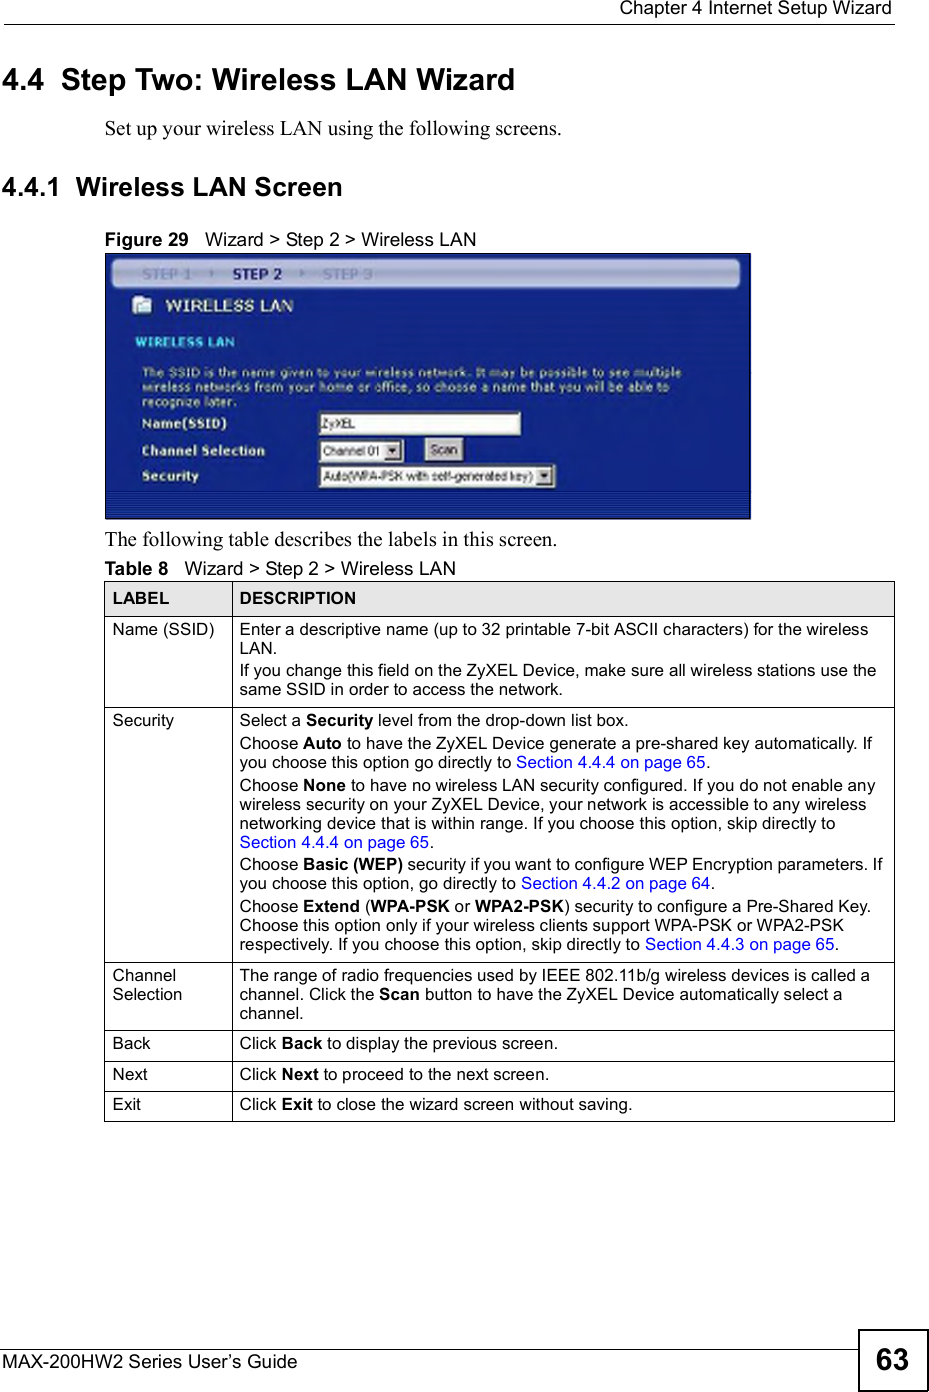  Chapter 4Internet Setup WizardMAX-200HW2 Series User s Guide 634.4  Step Two: Wireless LAN WizardSet up your wireless LAN using the following screens.4.4.1  Wireless LAN ScreenFigure 29   Wizard &gt; Step 2 &gt; Wireless LAN The following table describes the labels in this screen.Table 8   Wizard &gt; Step 2 &gt; Wireless LANLABEL DESCRIPTIONName (SSID) Enter a descriptive name (up to 32 printable 7-bit ASCII characters) for the wireless LAN.If you change this field on the ZyXEL Device, make sure all wireless stations use the same SSID in order to access the network.Security Select a Security level from the drop-down list box.Choose Auto to have the ZyXEL Device generate a pre-shared key automatically. If you choose this option go directly to Section 4.4.4 on page 65.Choose None to have no wireless LAN security configured. If you do not enable any wireless security on your ZyXEL Device, your network is accessible to any wireless networking device that is within range. If you choose this option, skip directly to Section 4.4.4 on page 65.Choose Basic (WEP) security if you want to configure WEP Encryption parameters. If you choose this option, go directly to Section 4.4.2 on page 64.Choose Extend (WPA-PSK or WPA2-PSK) security to configure a Pre-Shared Key. Choose this option only if your wireless clients support WPA-PSK or WPA2-PSK respectively. If you choose this option, skip directly to Section 4.4.3 on page 65.Channel SelectionThe range of radio frequencies used by IEEE 802.11b/g wireless devices is called a channel. Click the Scan button to have the ZyXEL Device automatically select a channel.Back Click Back to display the previous screen.Next Click Next to proceed to the next screen. Exit Click Exit to close the wizard screen without saving.